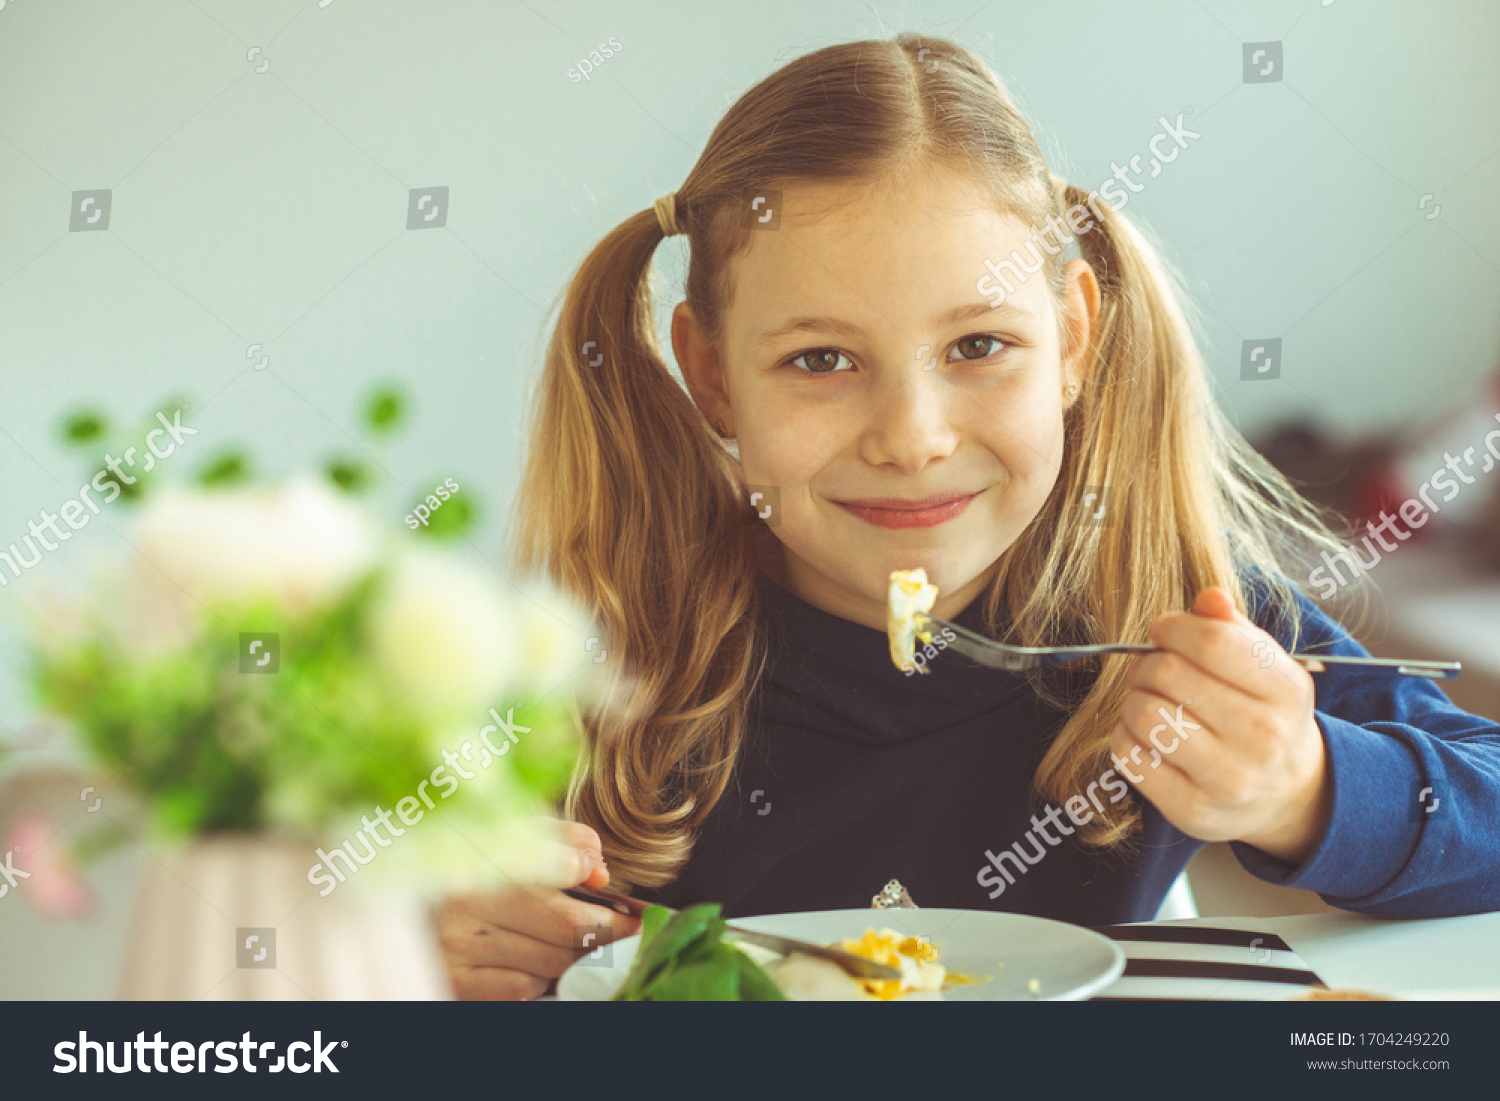 Cuteteen girl eating images